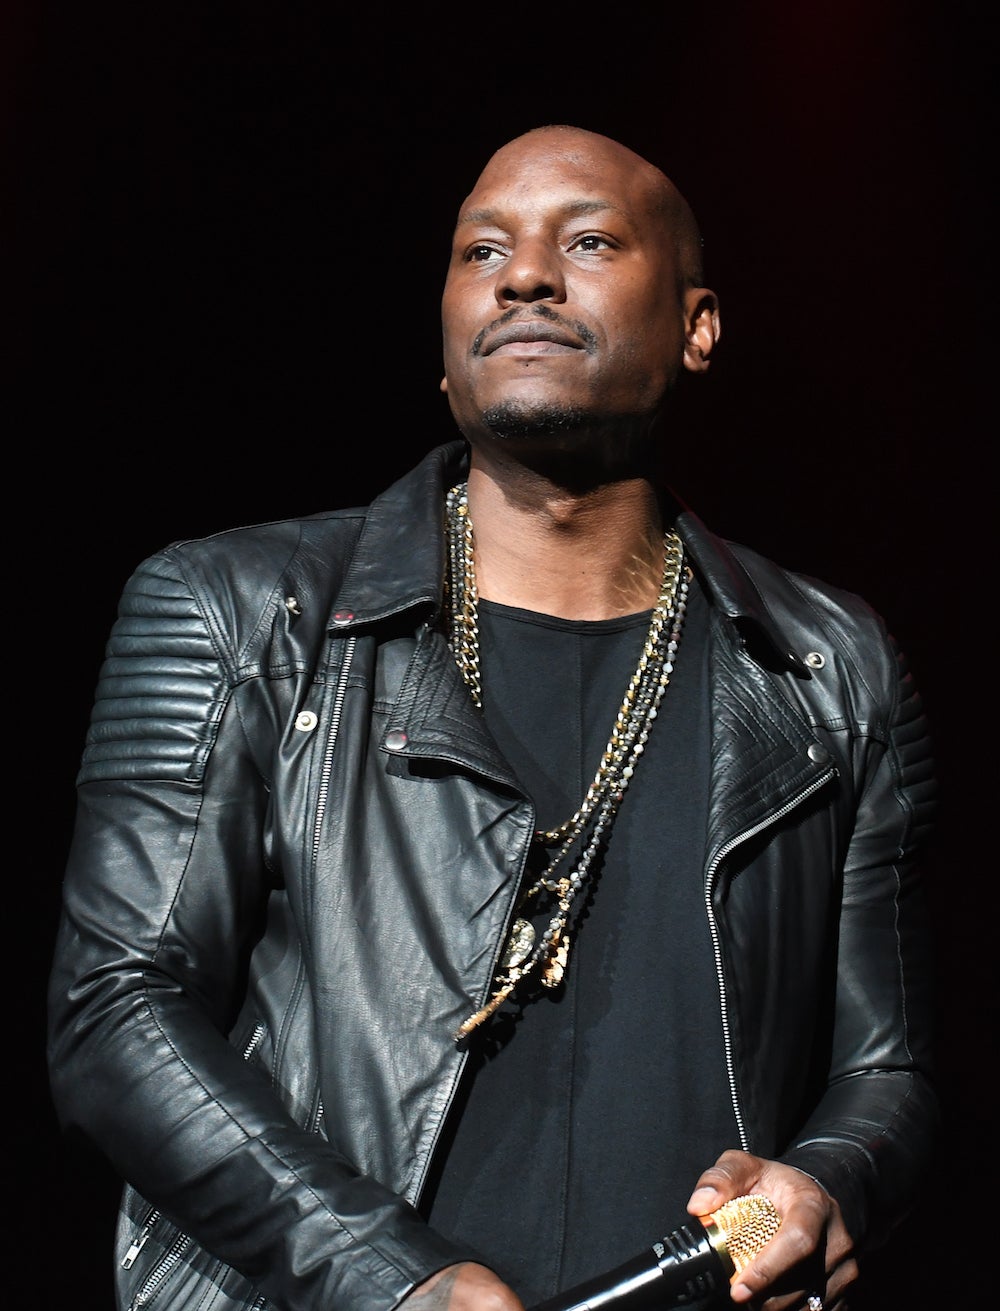 Tyrese's Ex-Wife Norma Gibson Is Requesting A Mental Evaluation For The Singer
